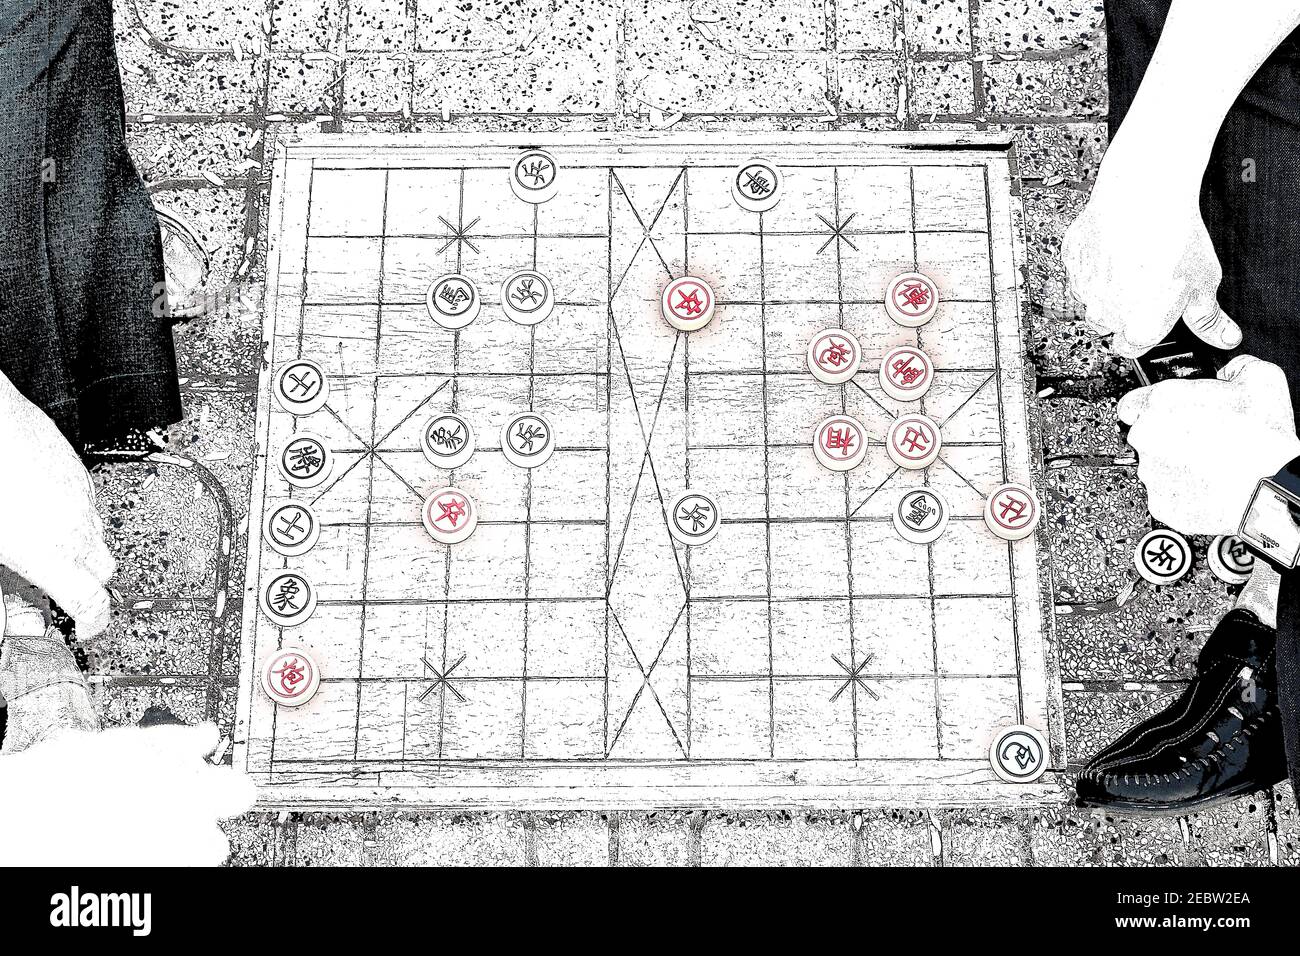 Xiangqi, also called Chinese chess, is a strategy board game for two players. It is one of the most popular board games in China, and is in the same f Stock Photo